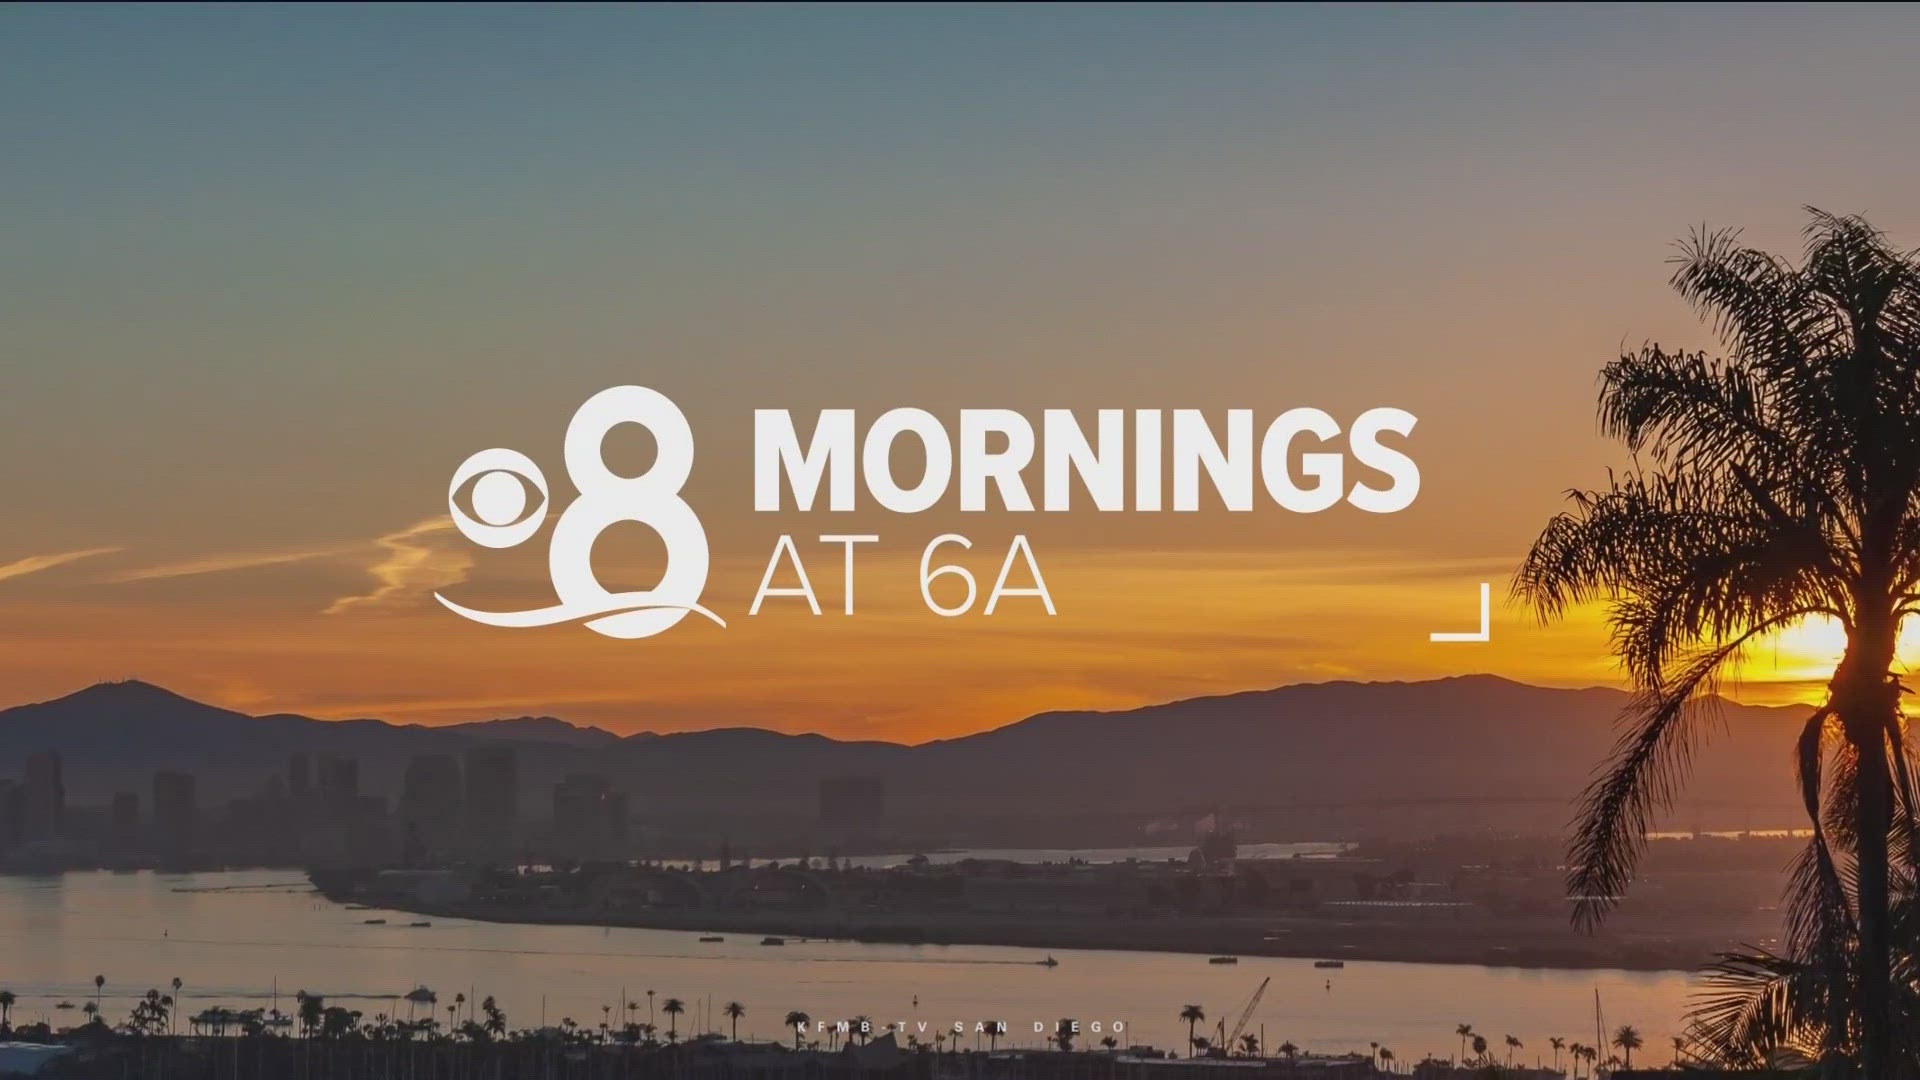 Here are the top stories around San Diego County for the morning of Tuesday, July 2nd.
For the latest news, weather and sports, head to:
https://www.cbs8.com/